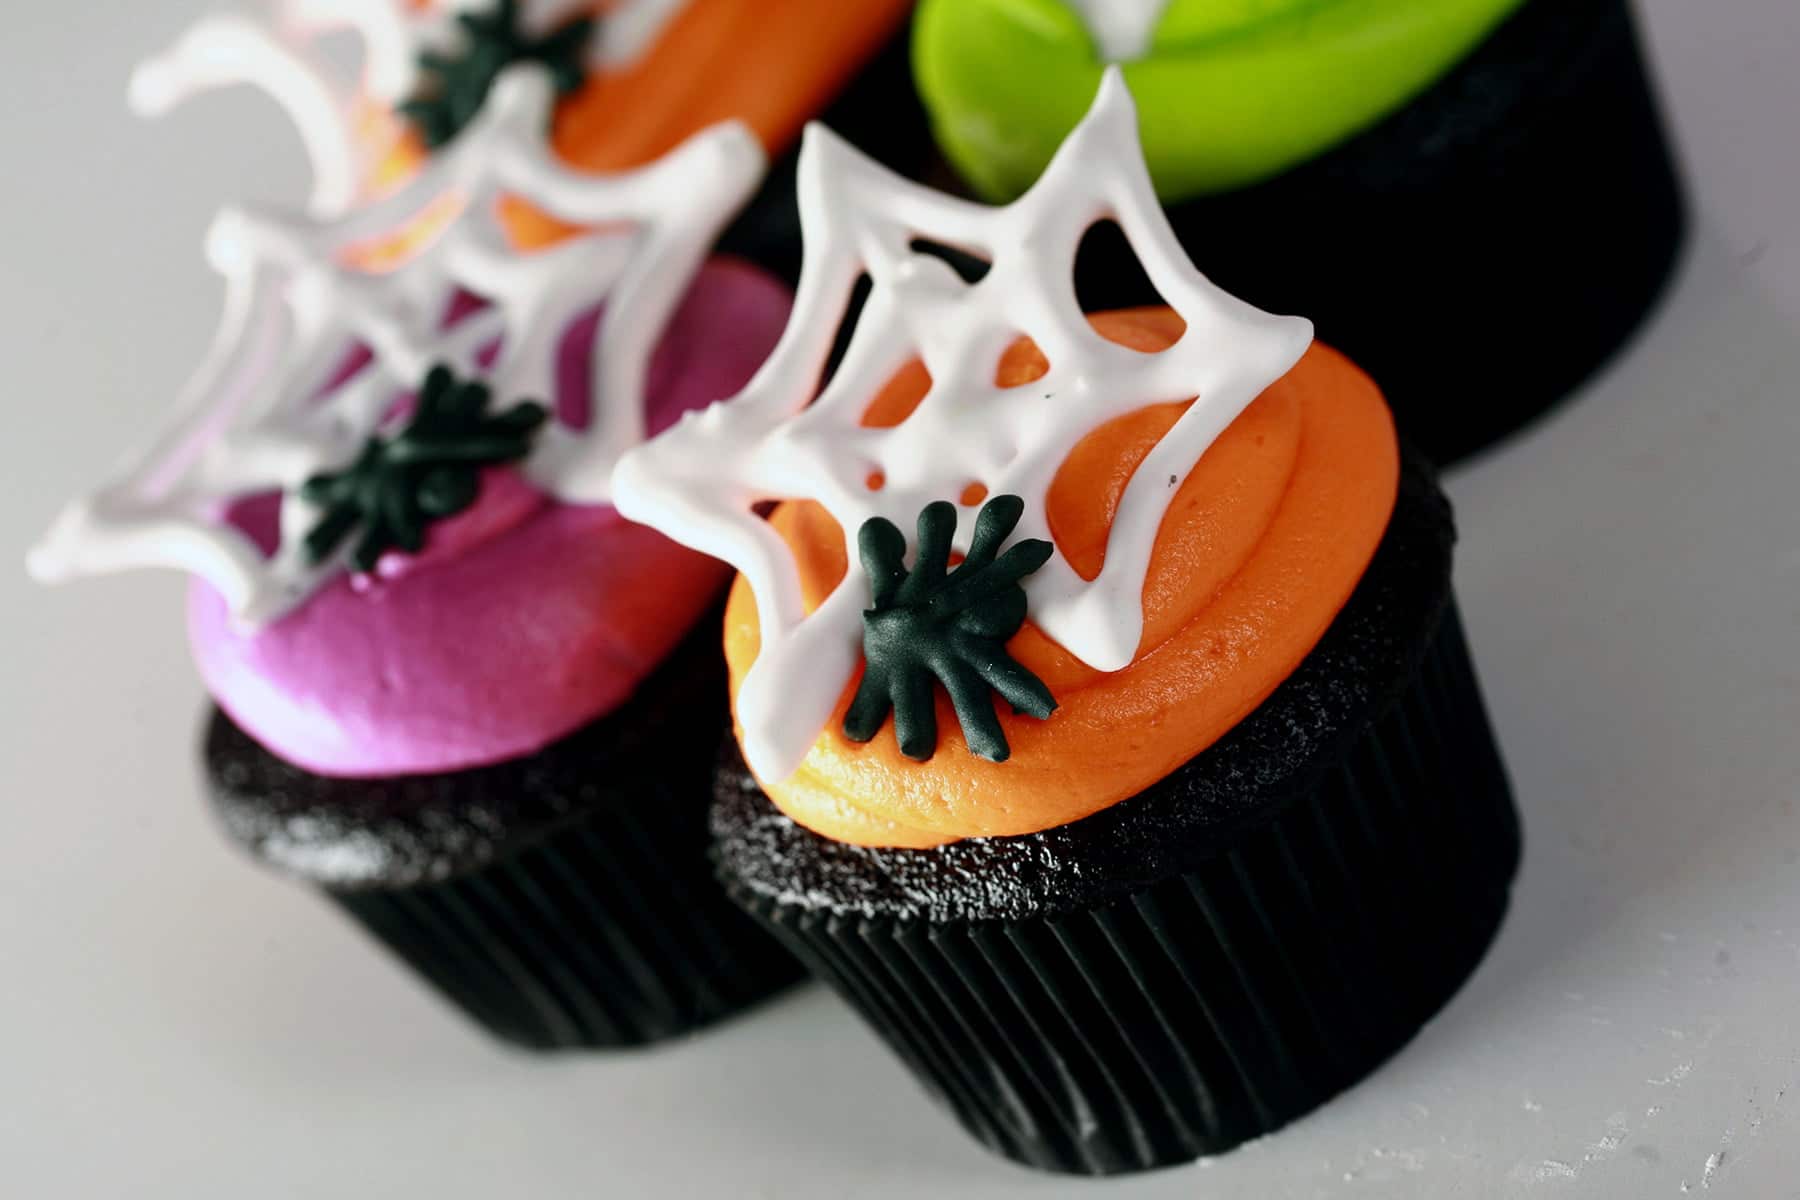 4 black velvet cupcakes frosted with brightly coloured icing - lime green, electric purple, and orange - are shown topped with royal icing spider webs and spiders.